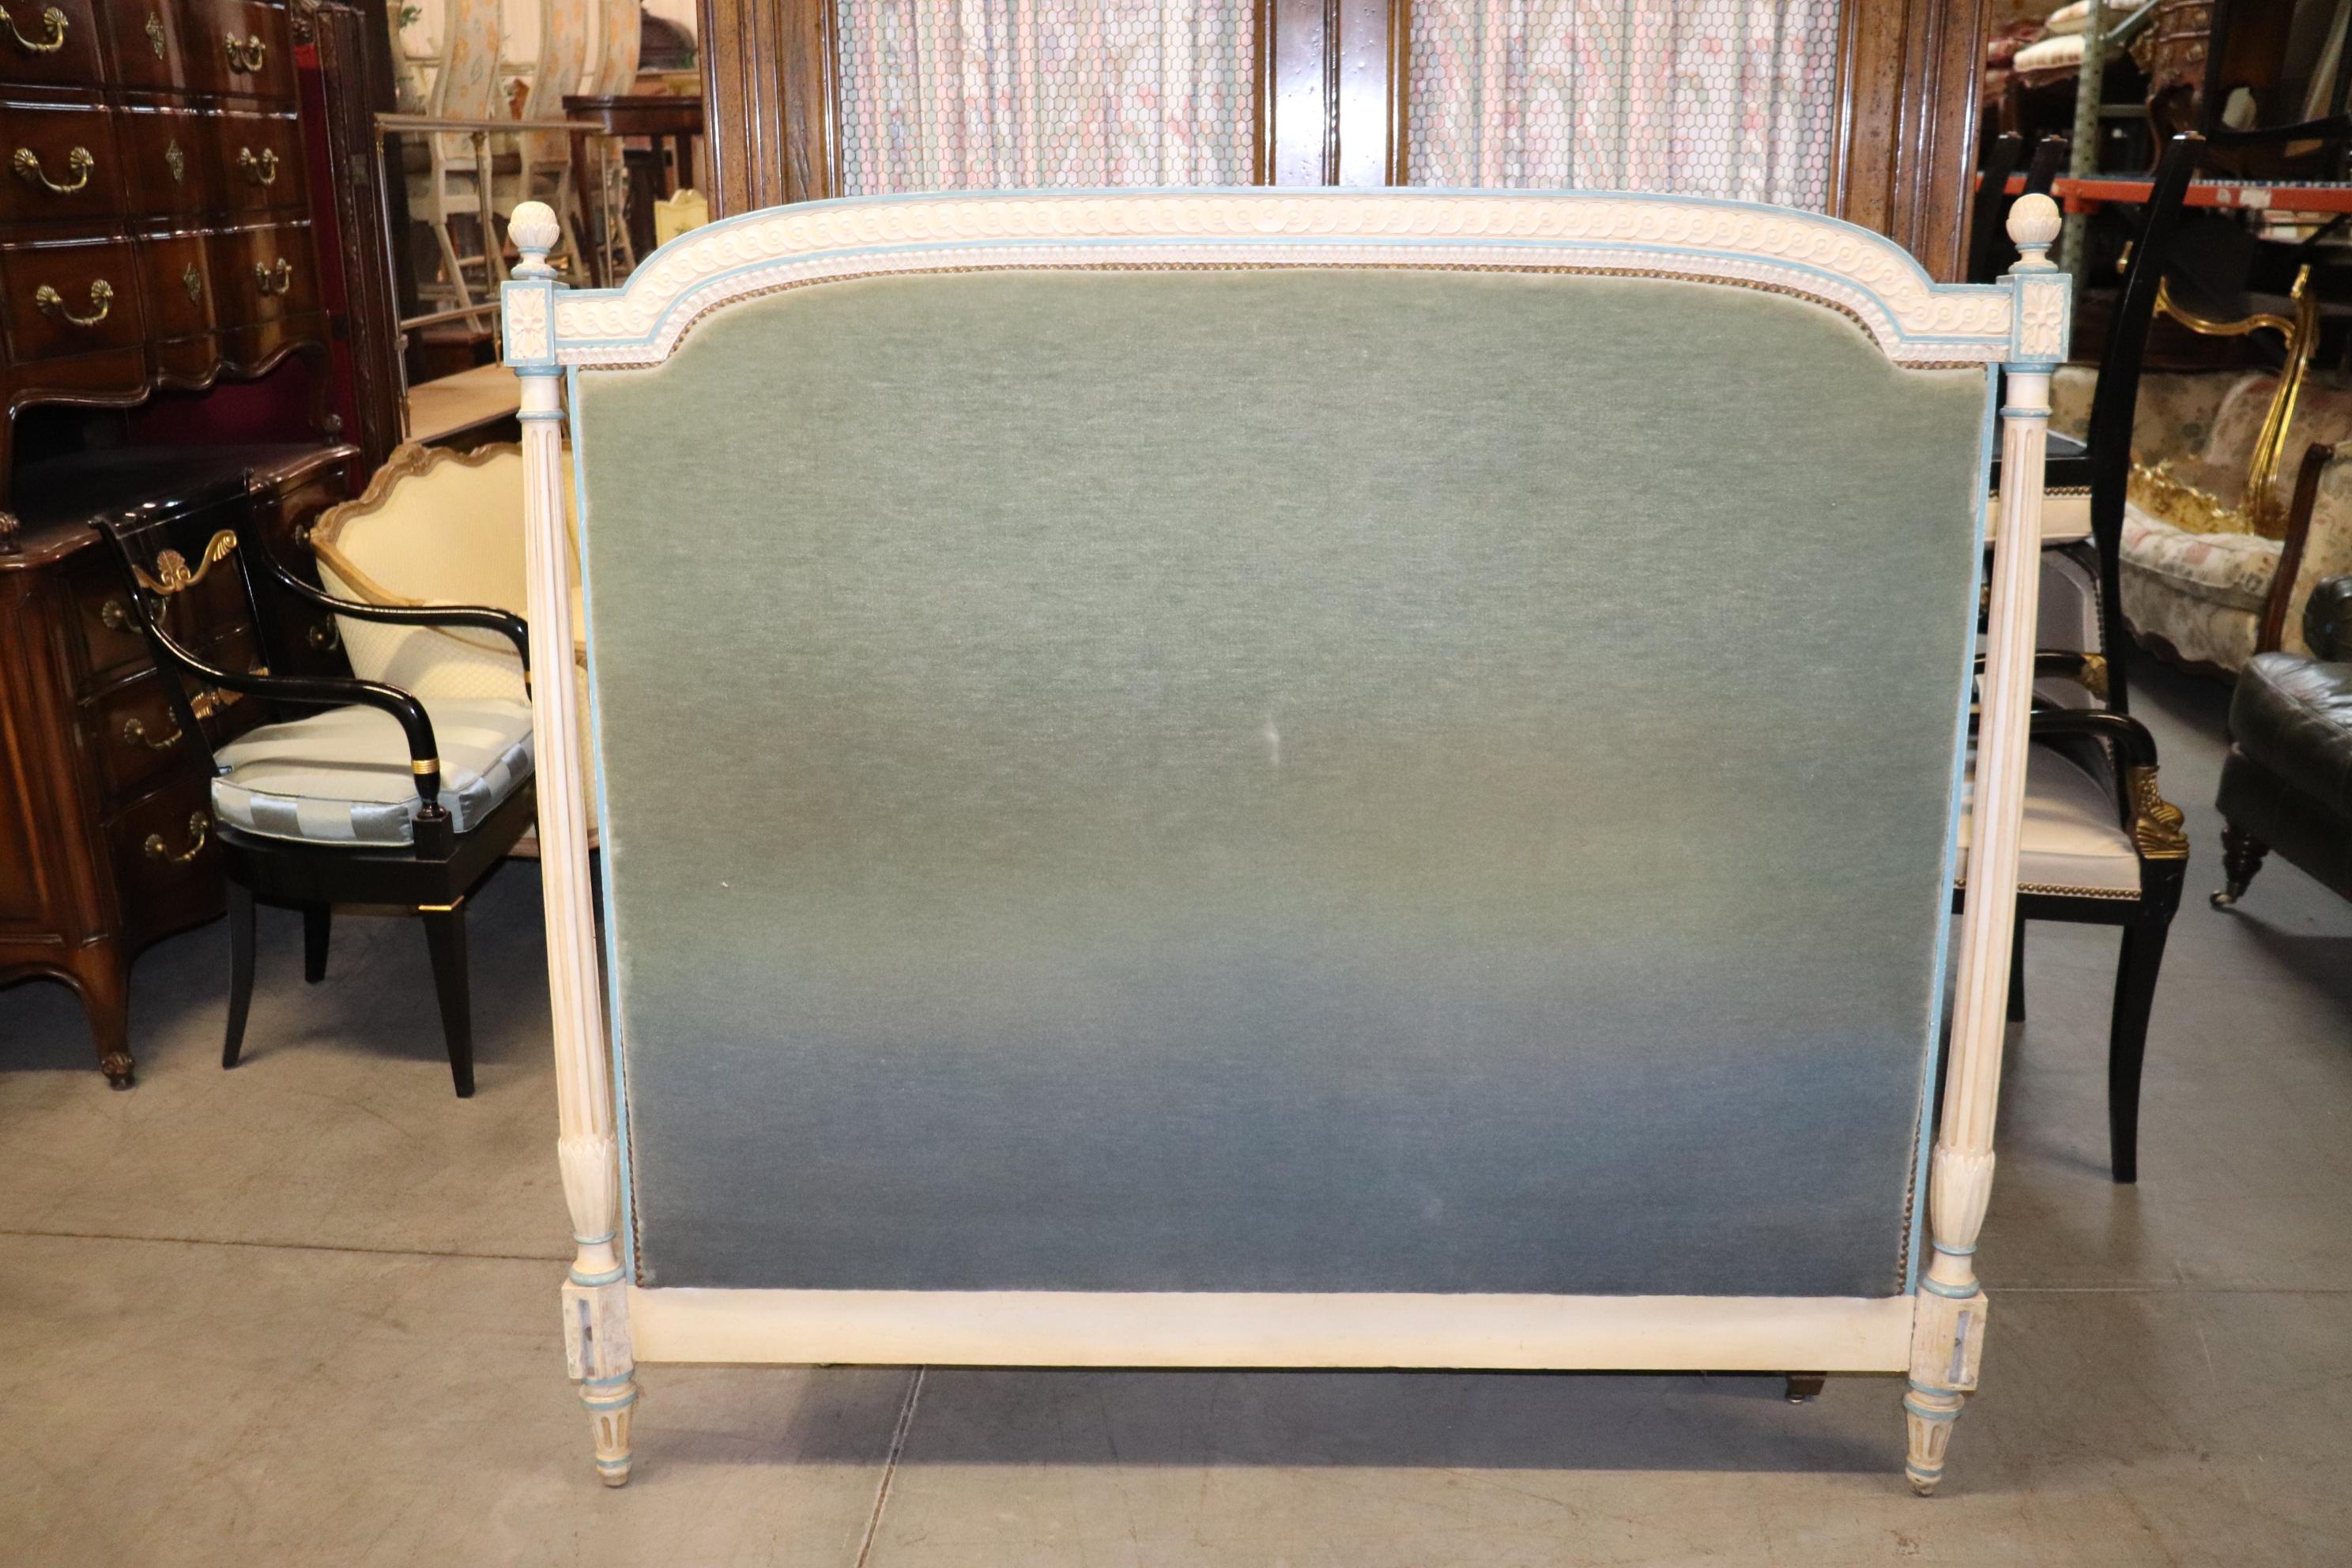 This is a fantastic vintage French Louis XVI headboard and footboard. There are no rails, but it can be used with a metal frame as a conventional queen size bed. The bed is upholstered in its original bluish faded wool mohair and is in good